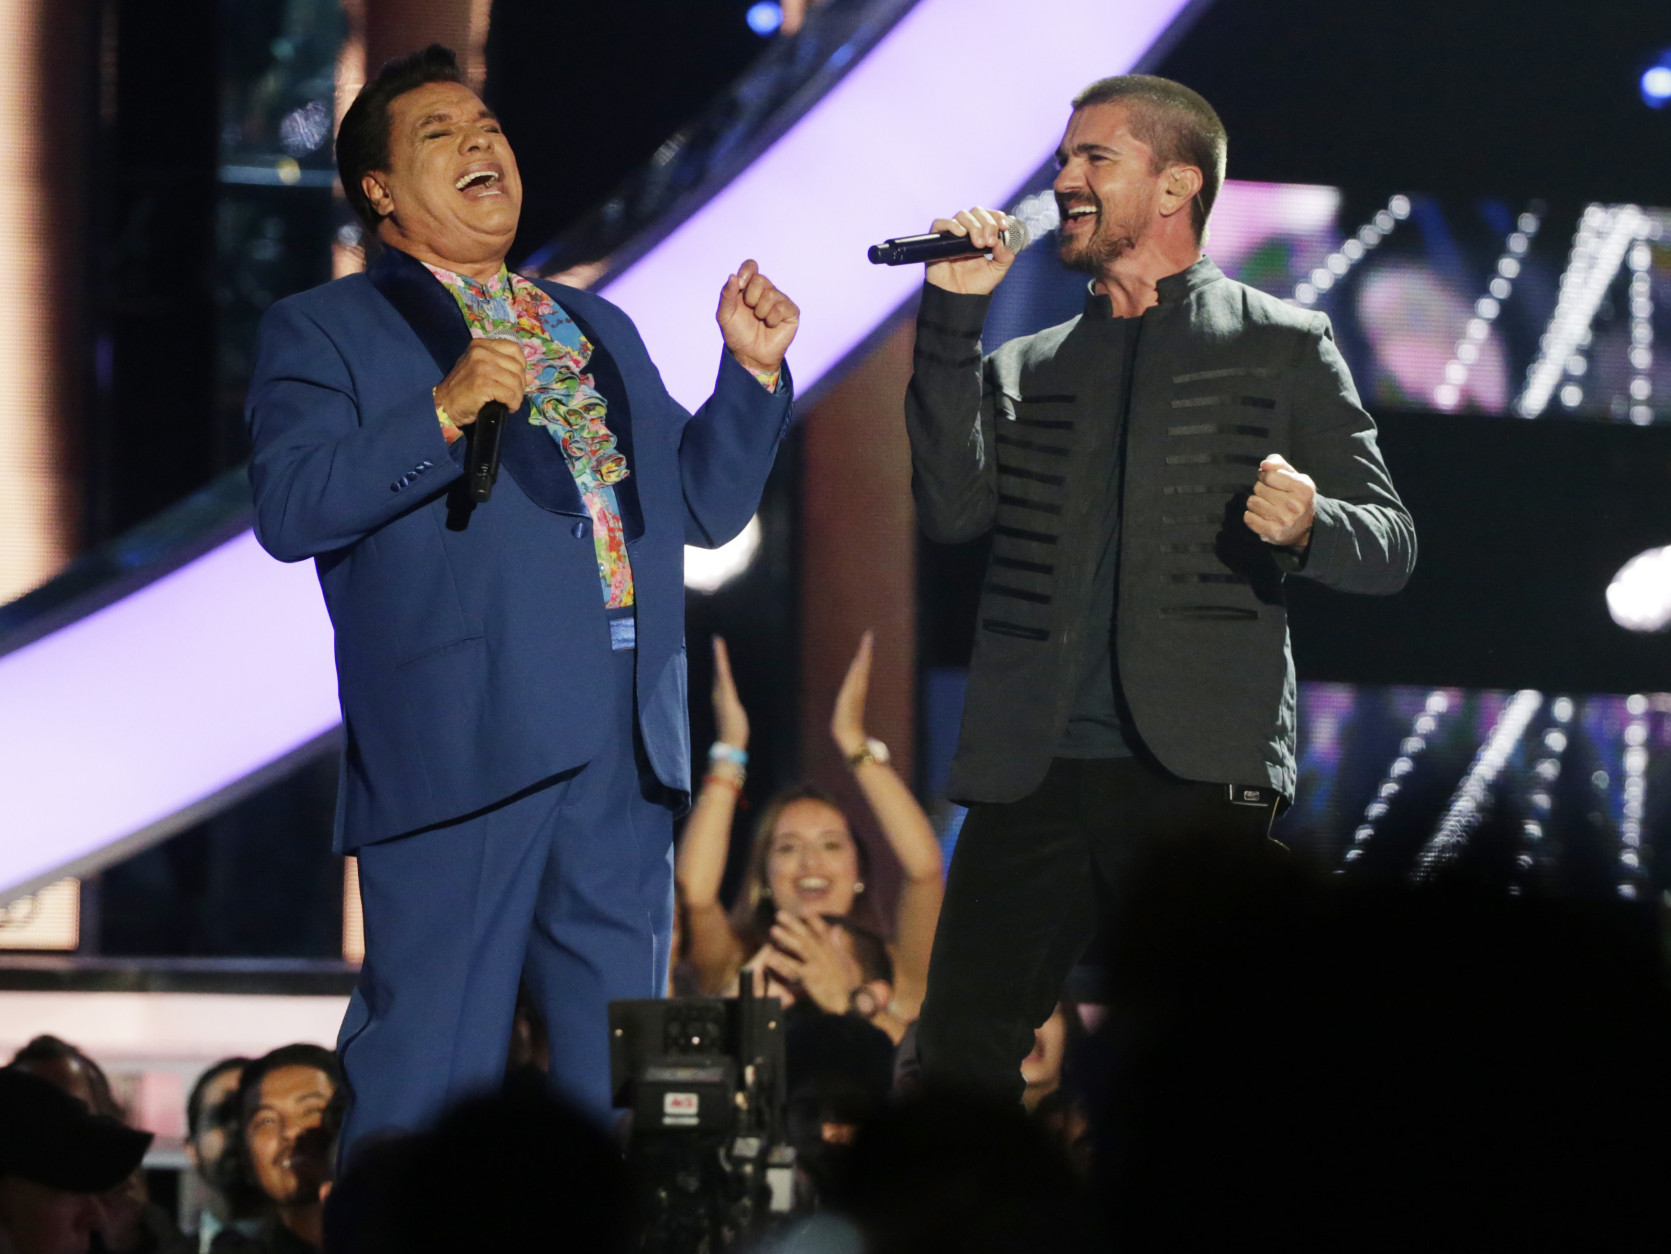 Singers Juan Gabriel, left, and Juanes, perform a song together during the Latin Billboard Awards, Thursday, April 28, 2016 in Coral Gables, Fla. (AP Photo/Wilfredo Lee)